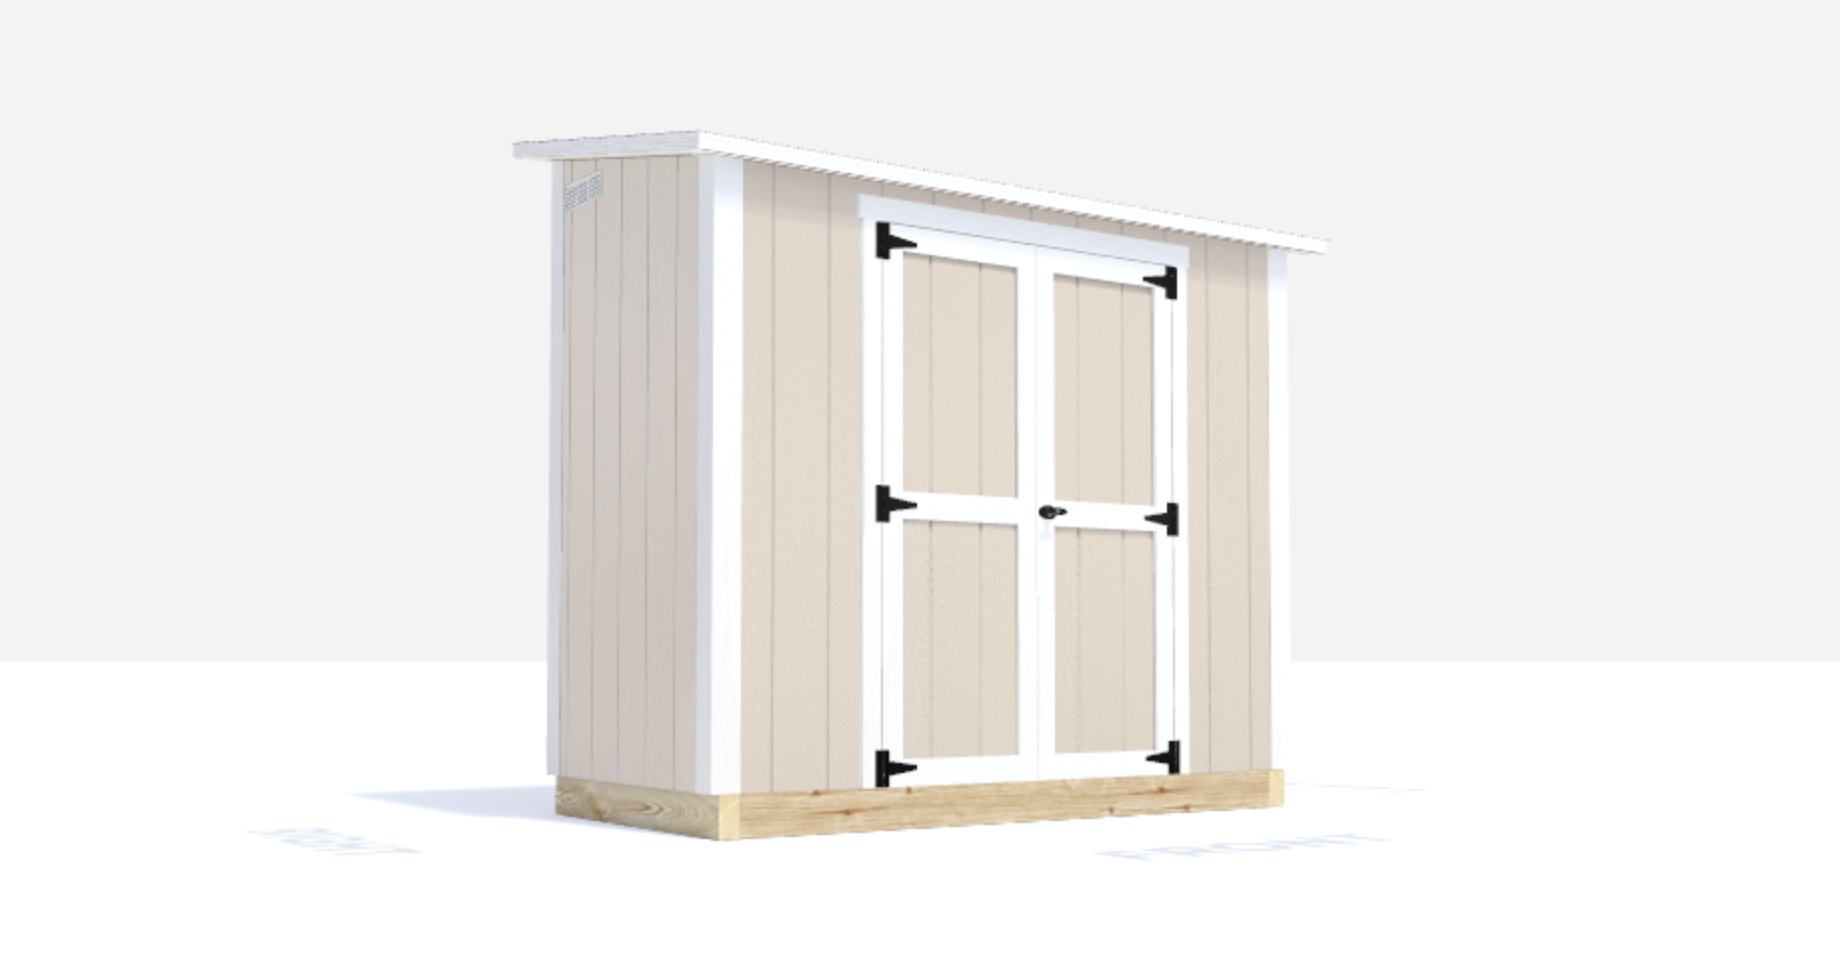 4x8 lean to shed